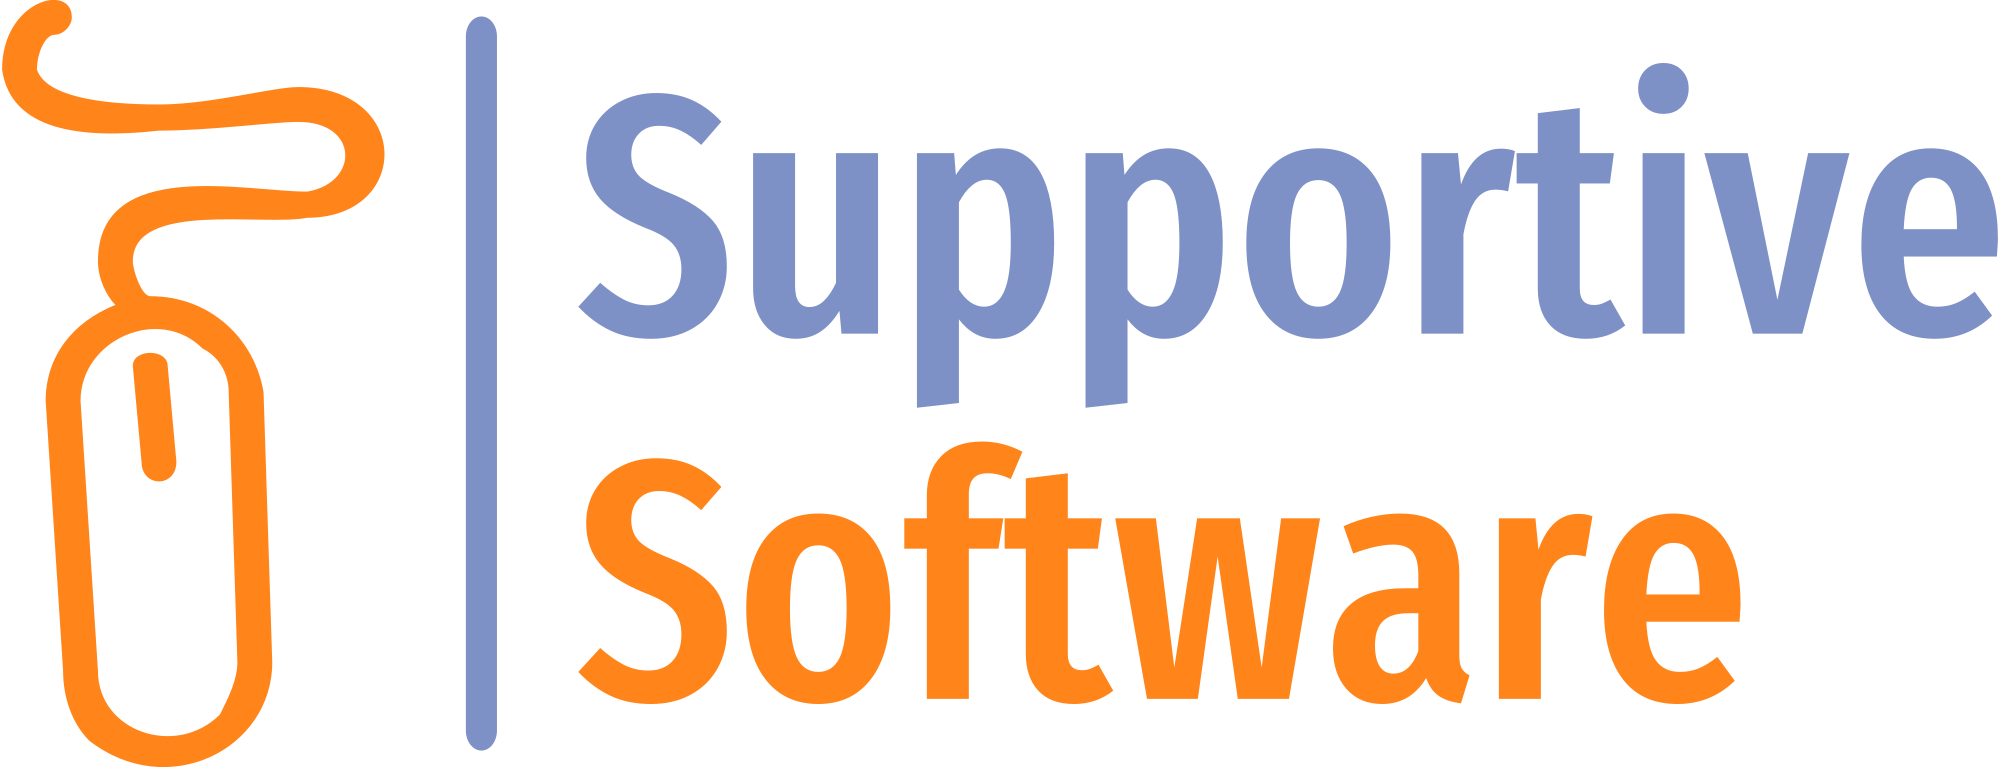 Supportive Software Logo